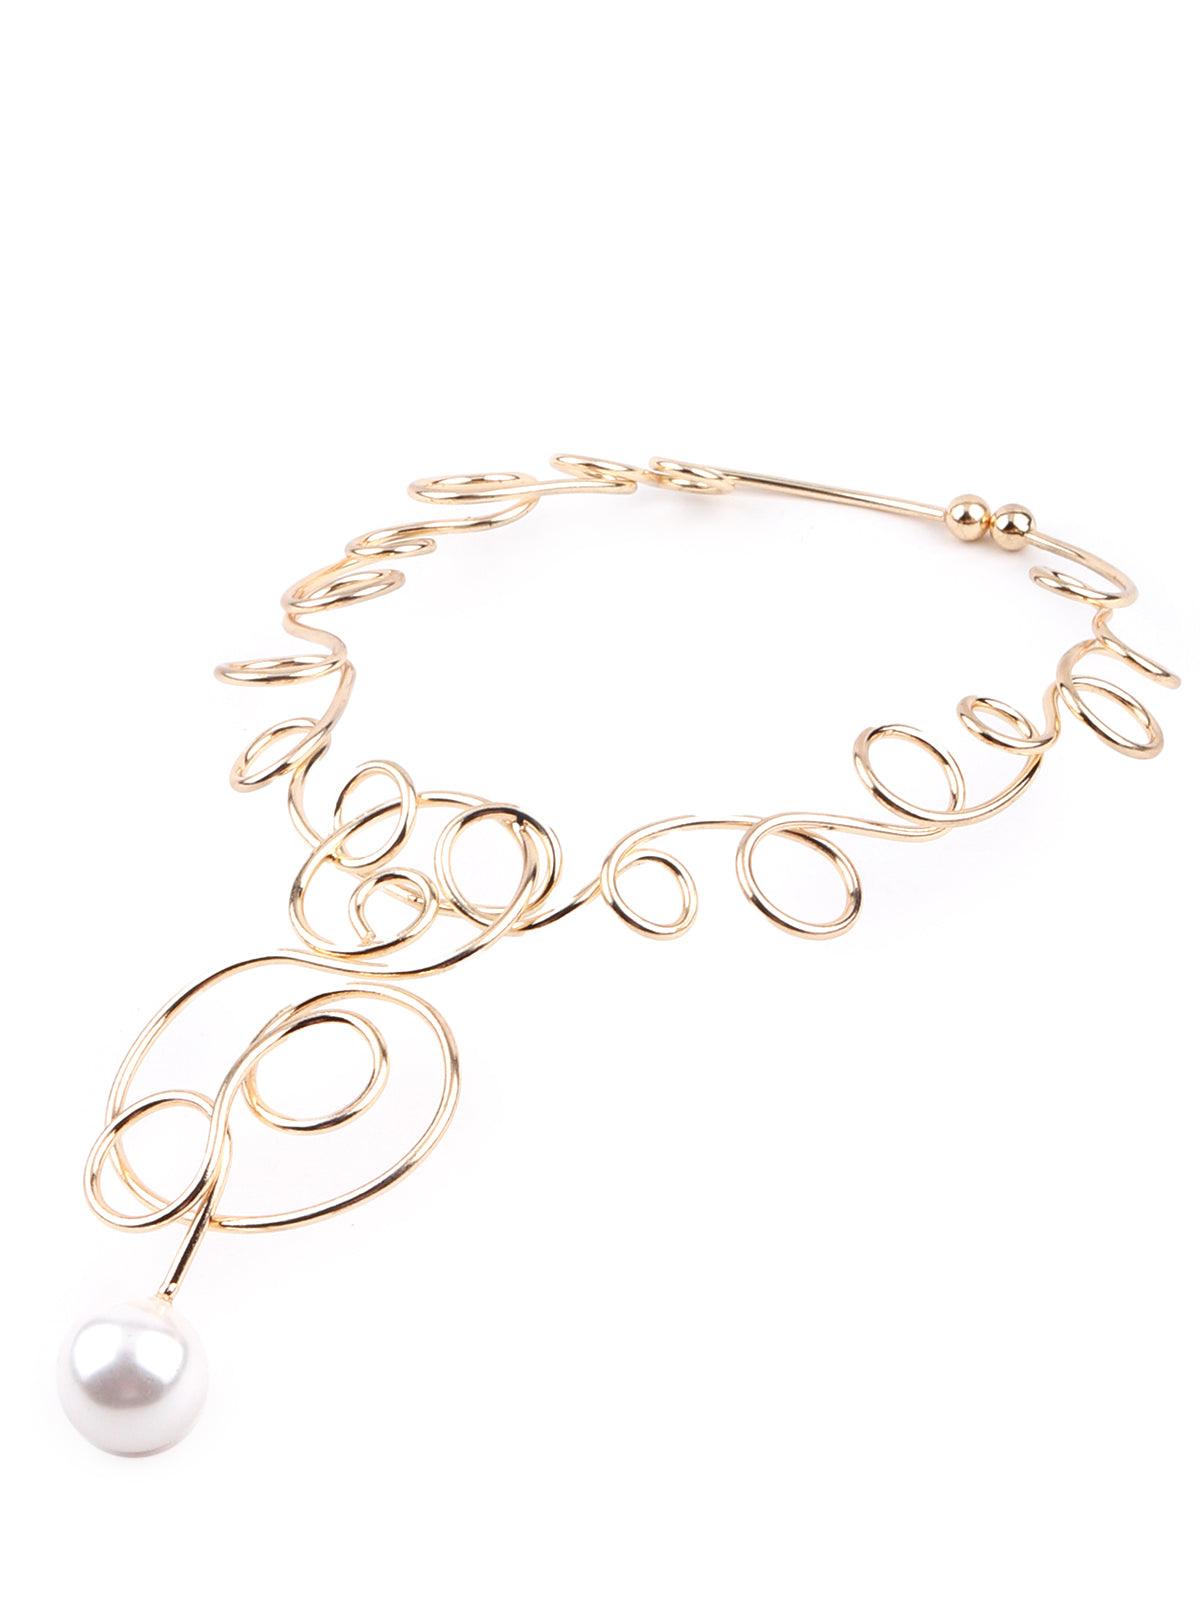 Gorgeous gold-tone whimsical necklace - Odette